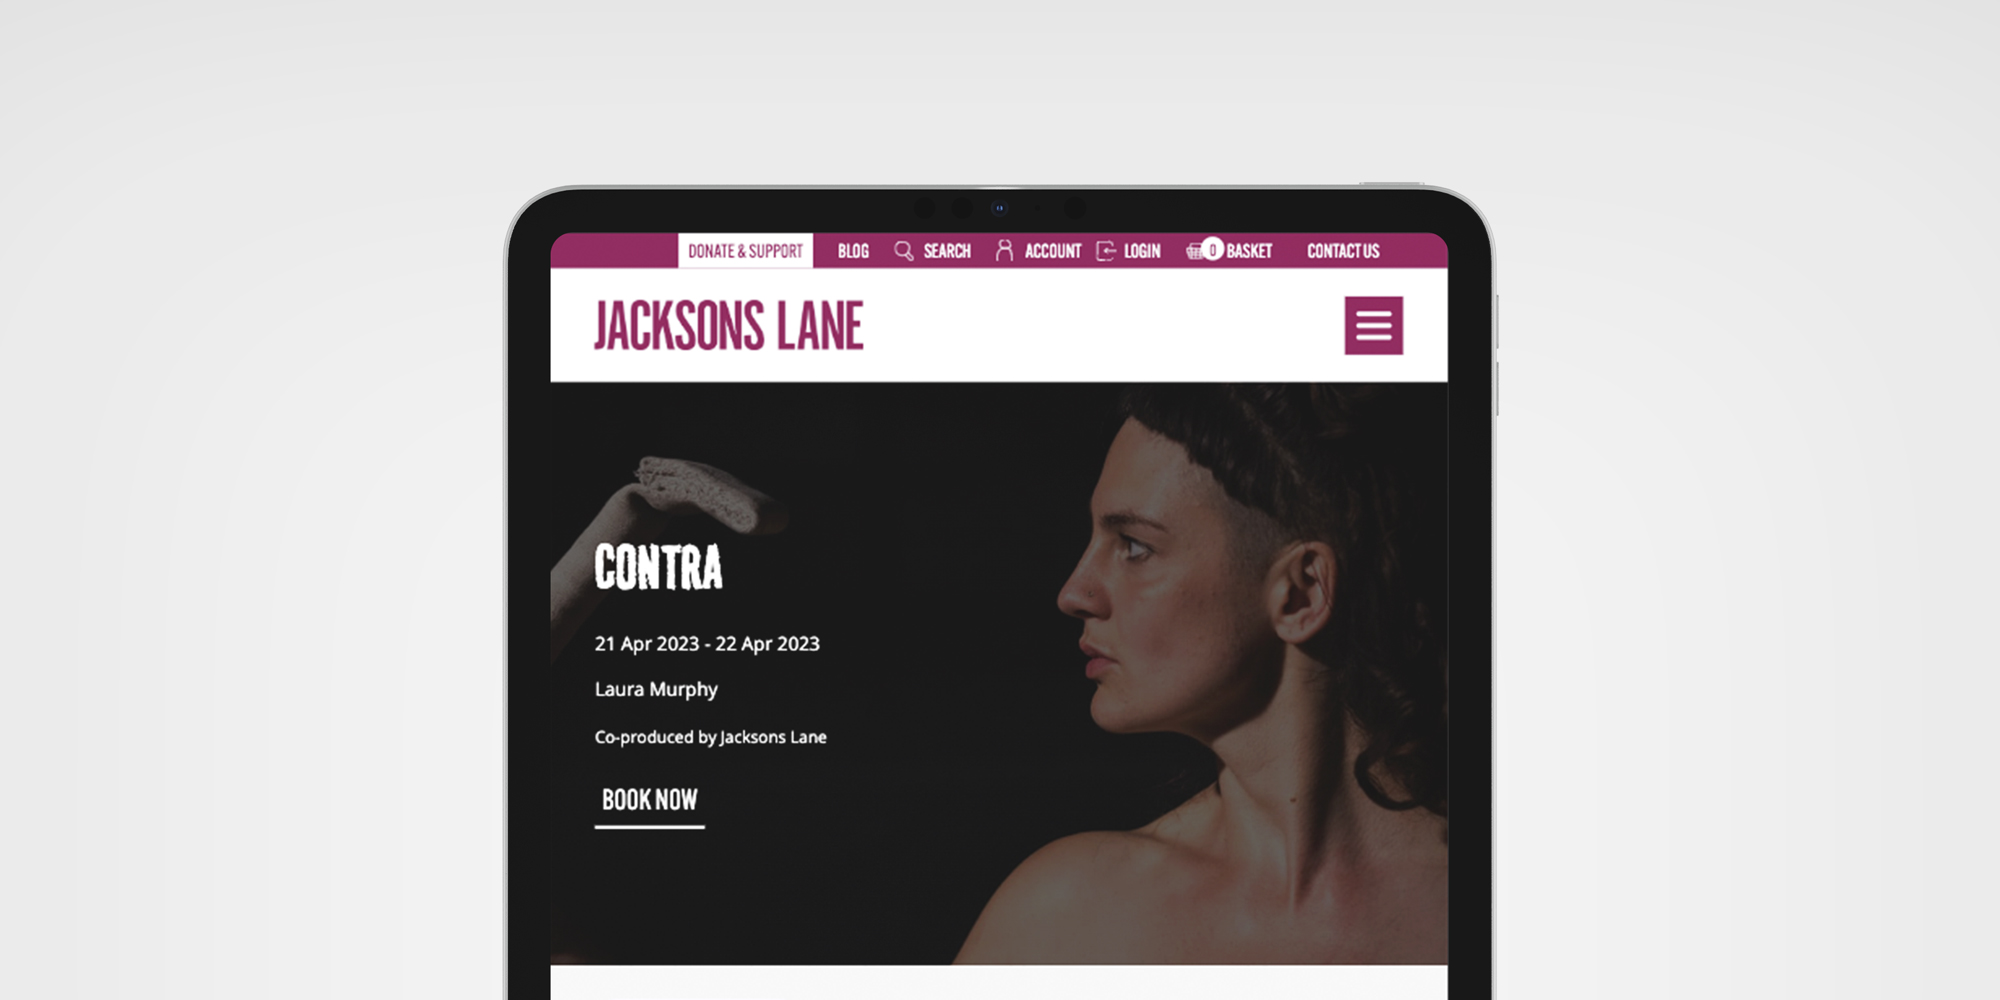 Jacksons Lane pages shown on a tablet